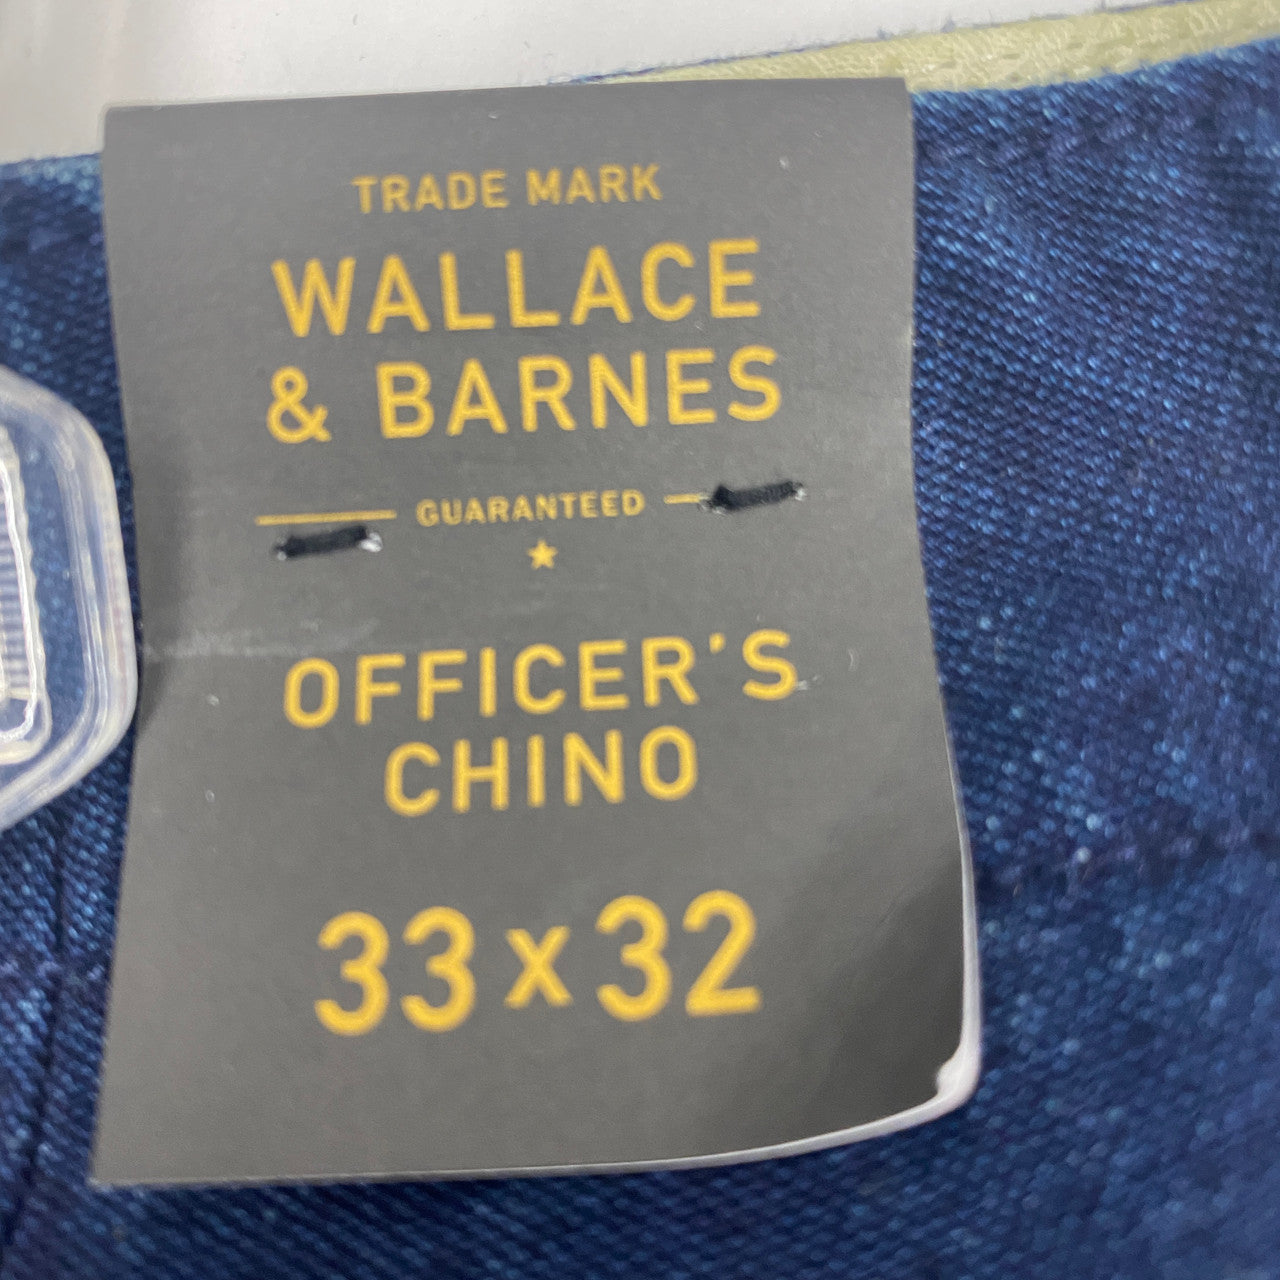 Wallace & Barnes Denim Officer's Chino-Label